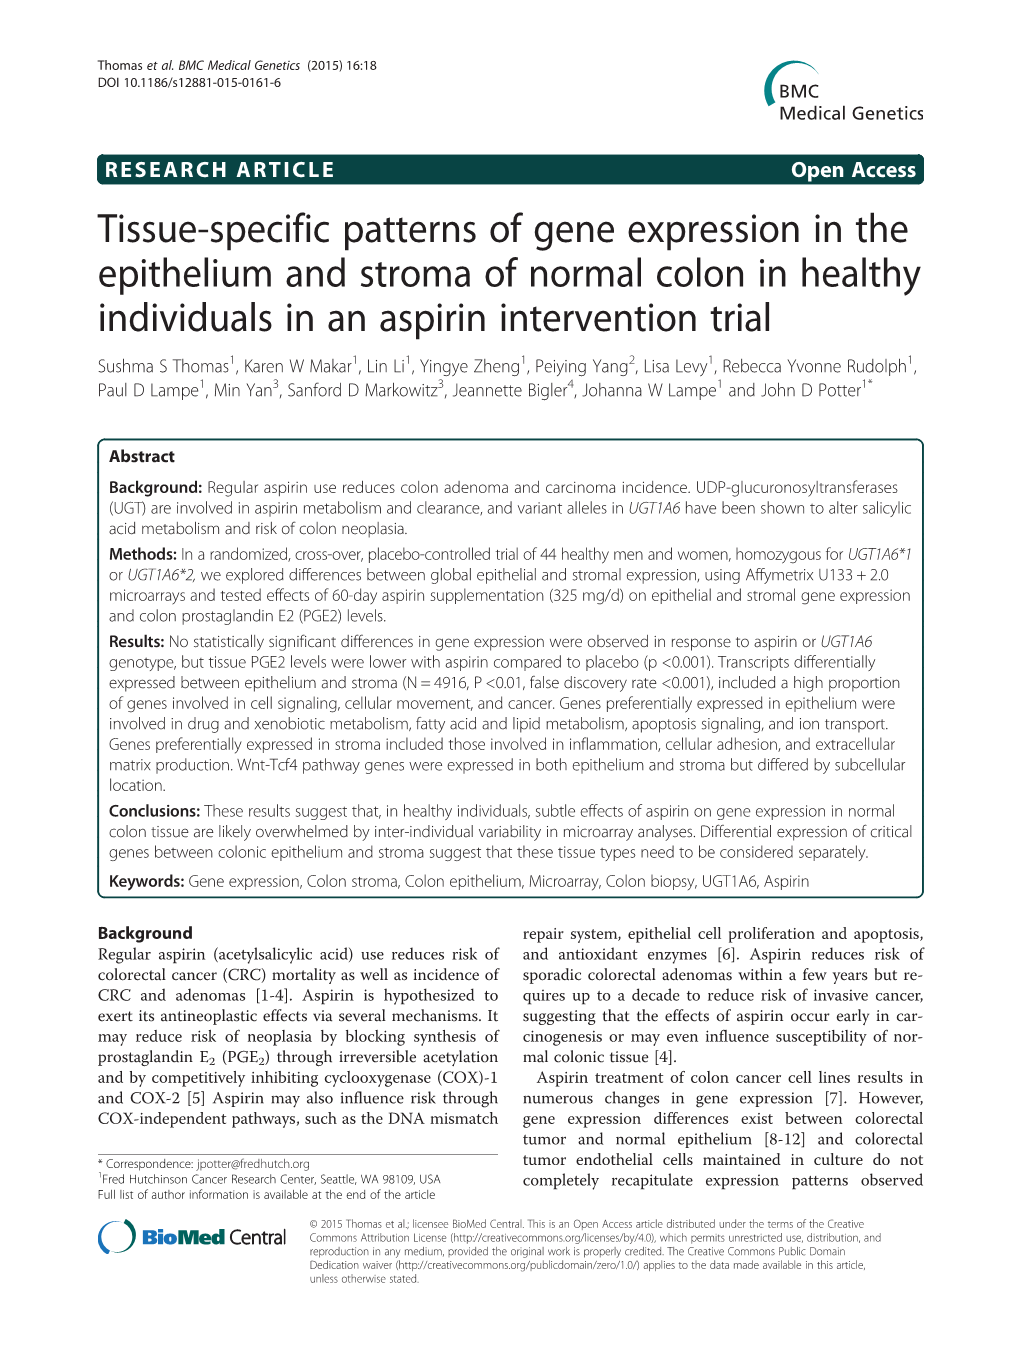 Tissue-Specific Patterns of Gene Expression in the Epithelium And